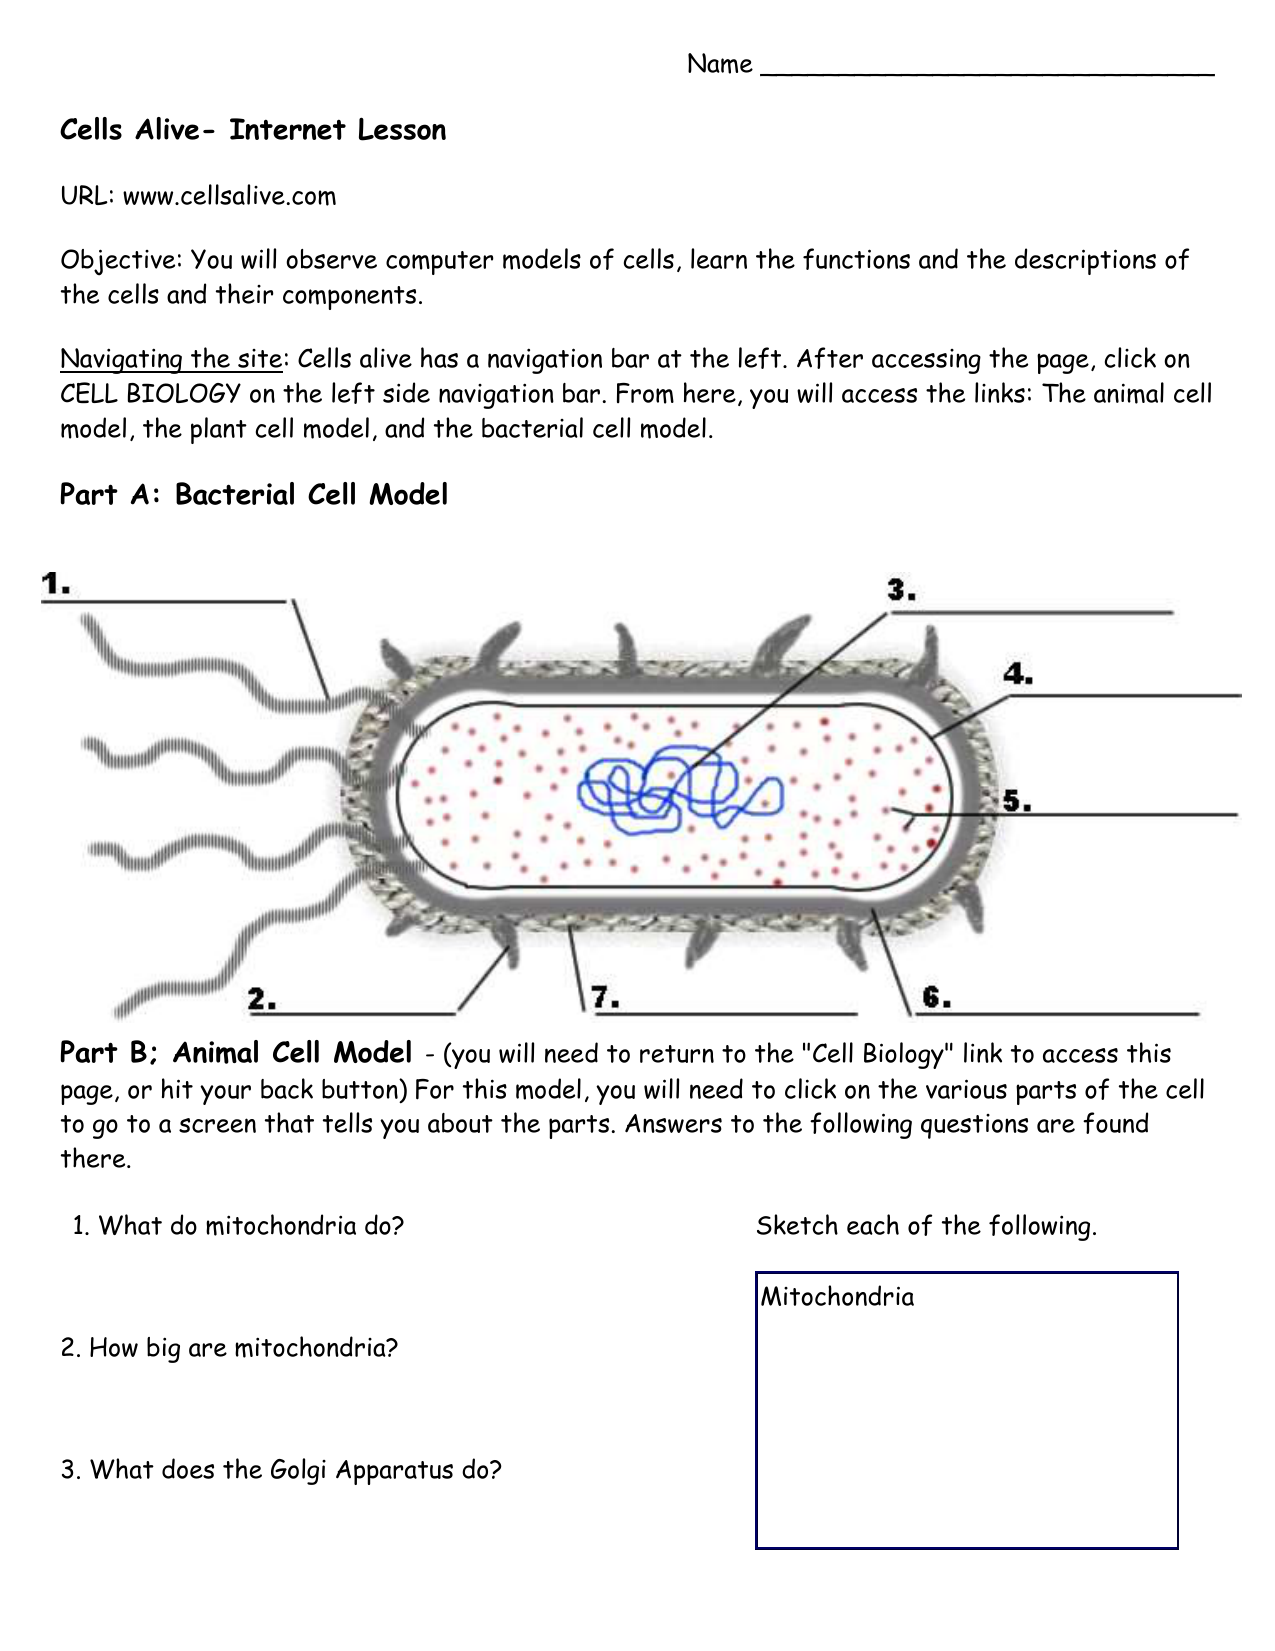 Cells Alive Tutorial 21-21 With Cells Alive Worksheet Answer Key